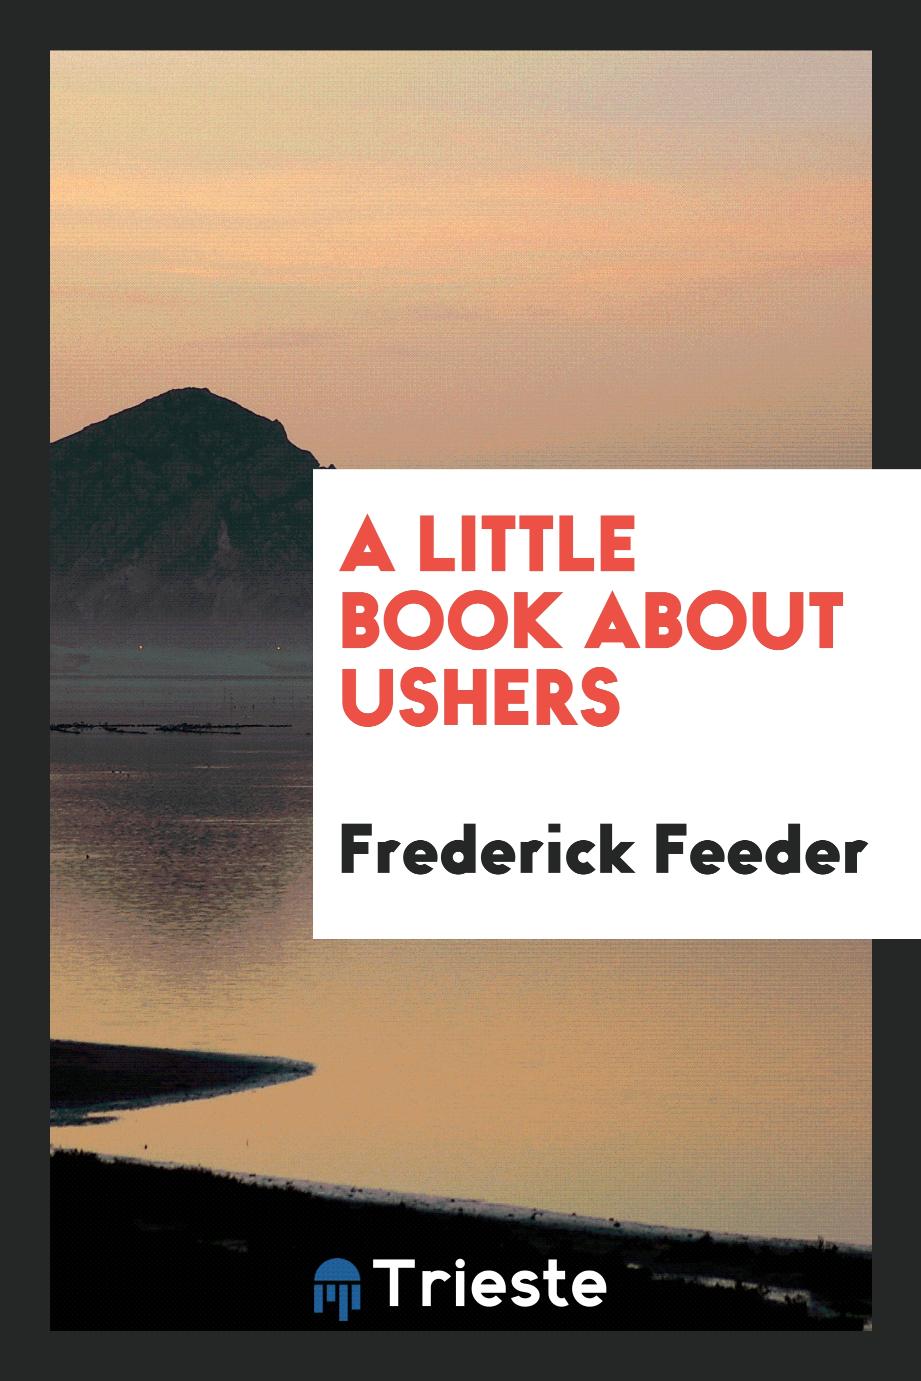 A Little Book About Ushers